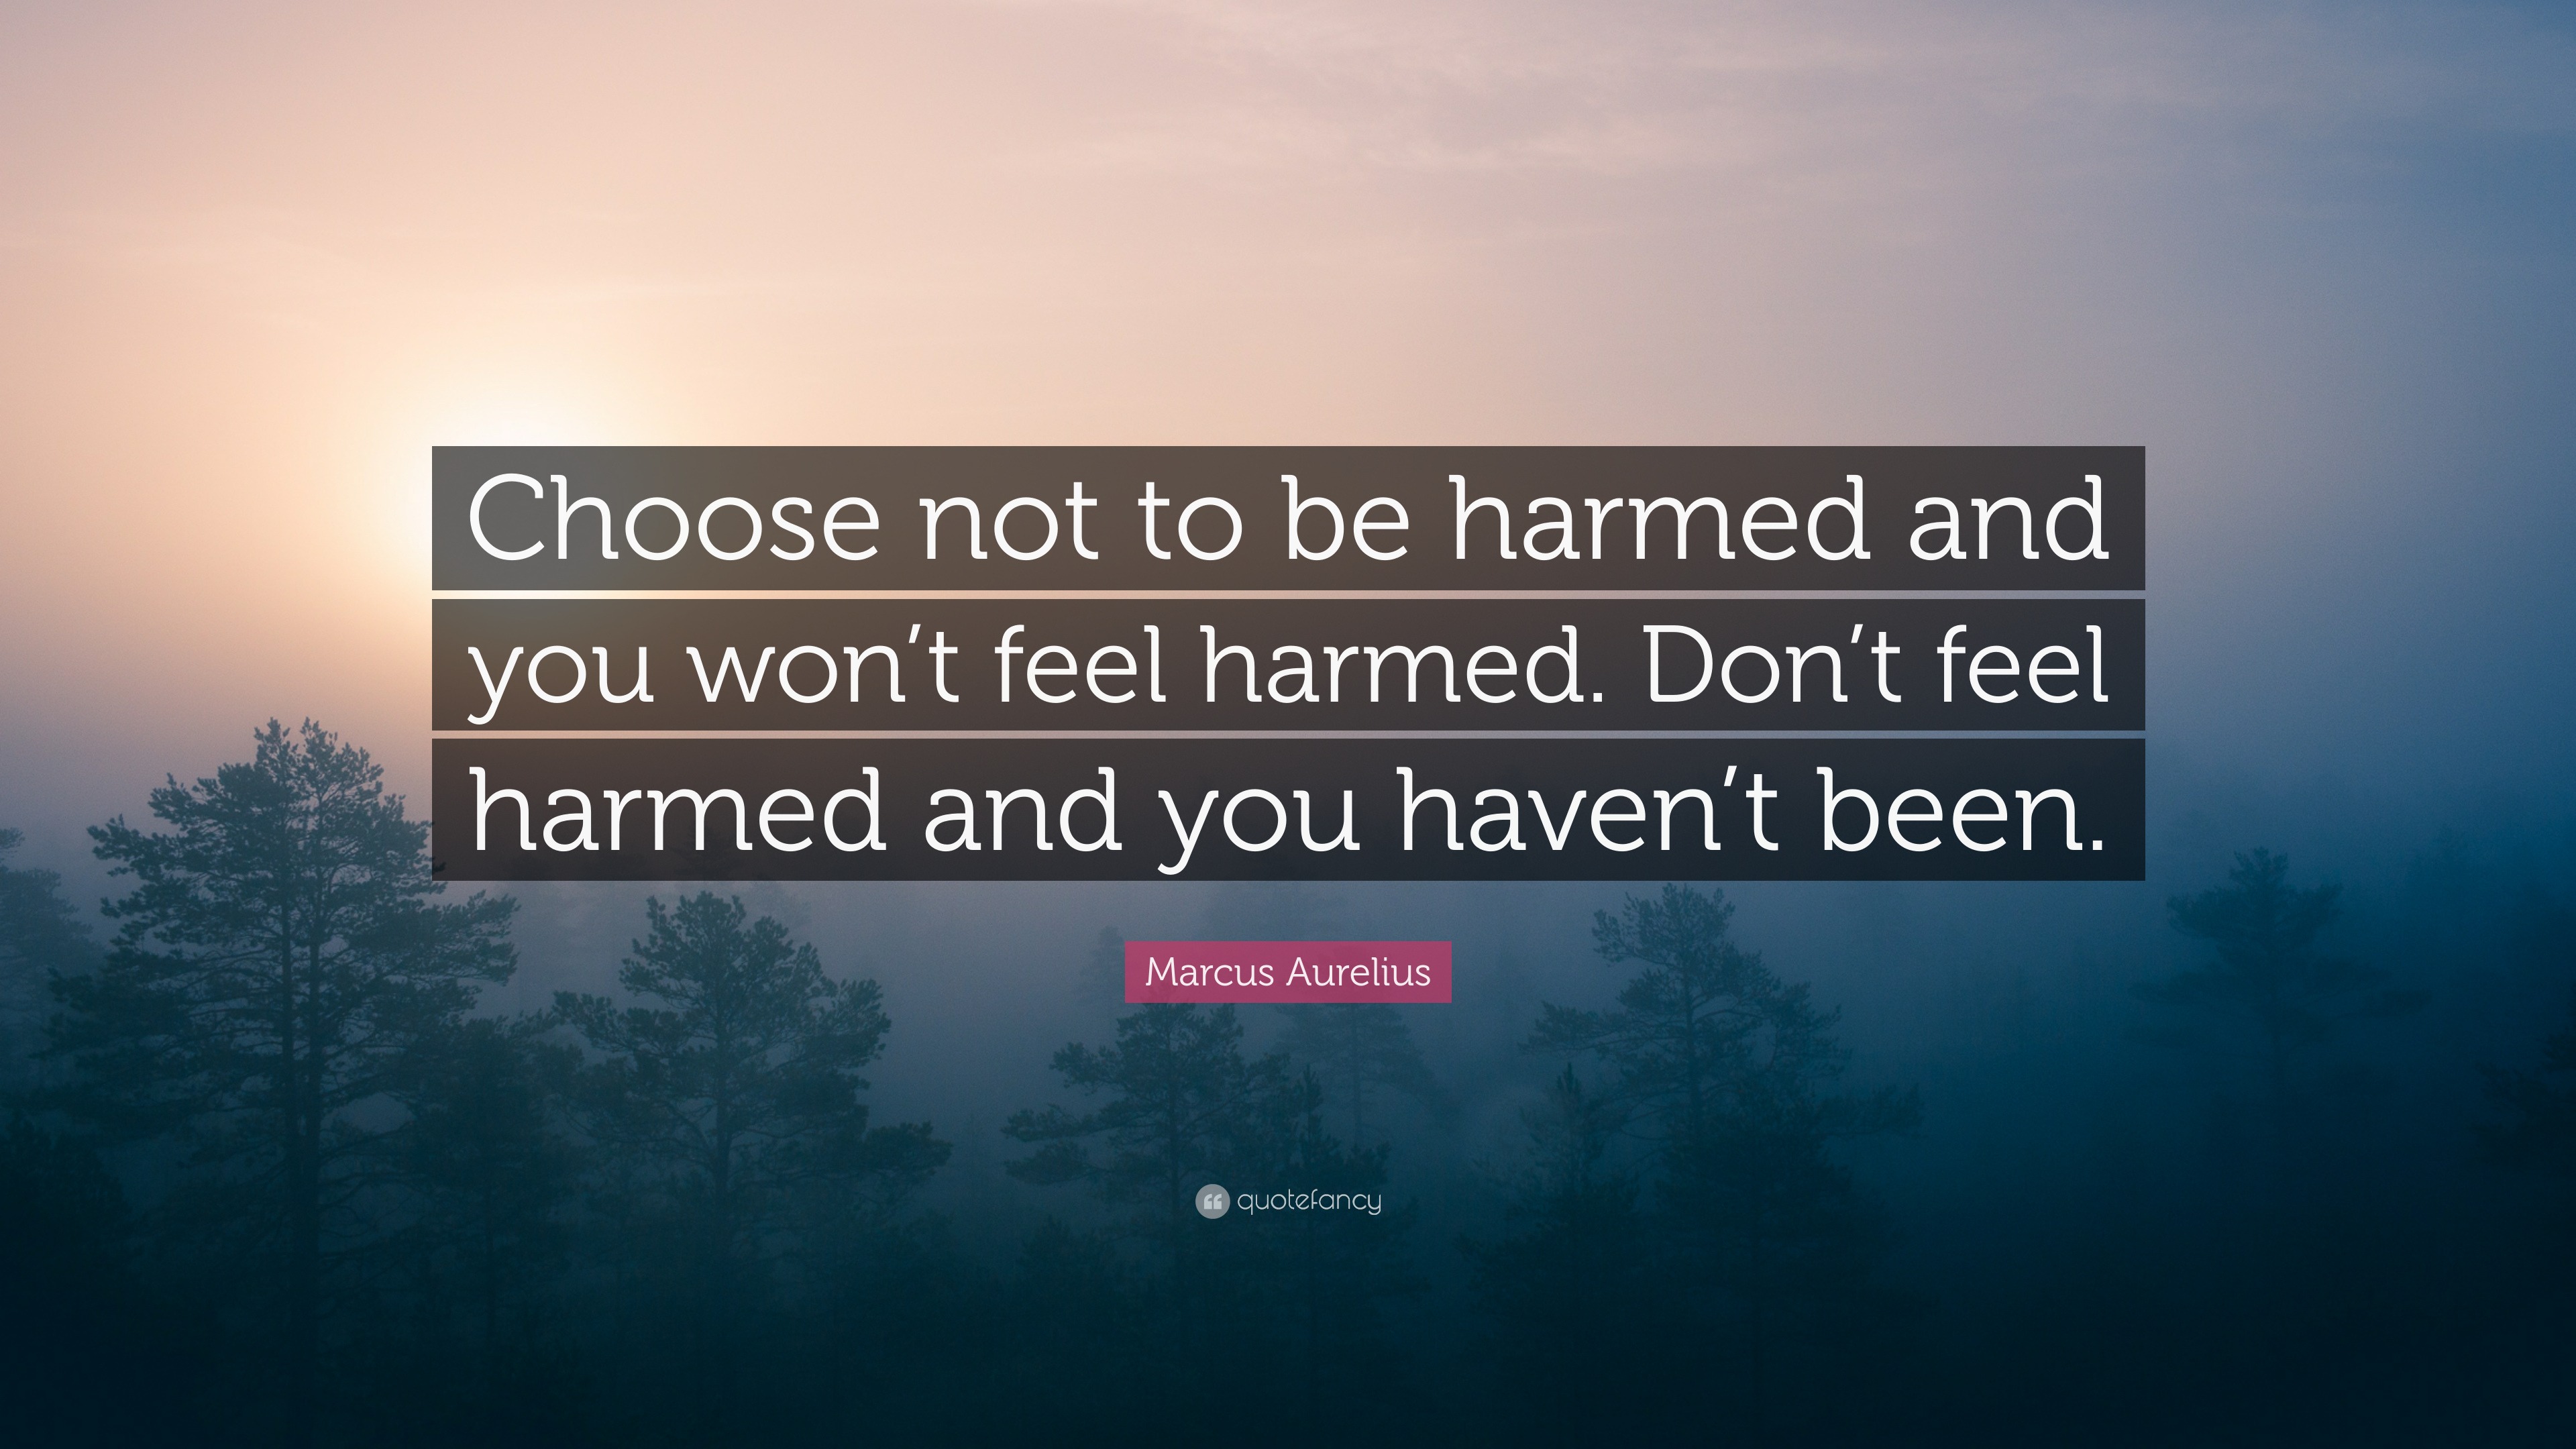 Don’t feel harmed and you haven’t been. 